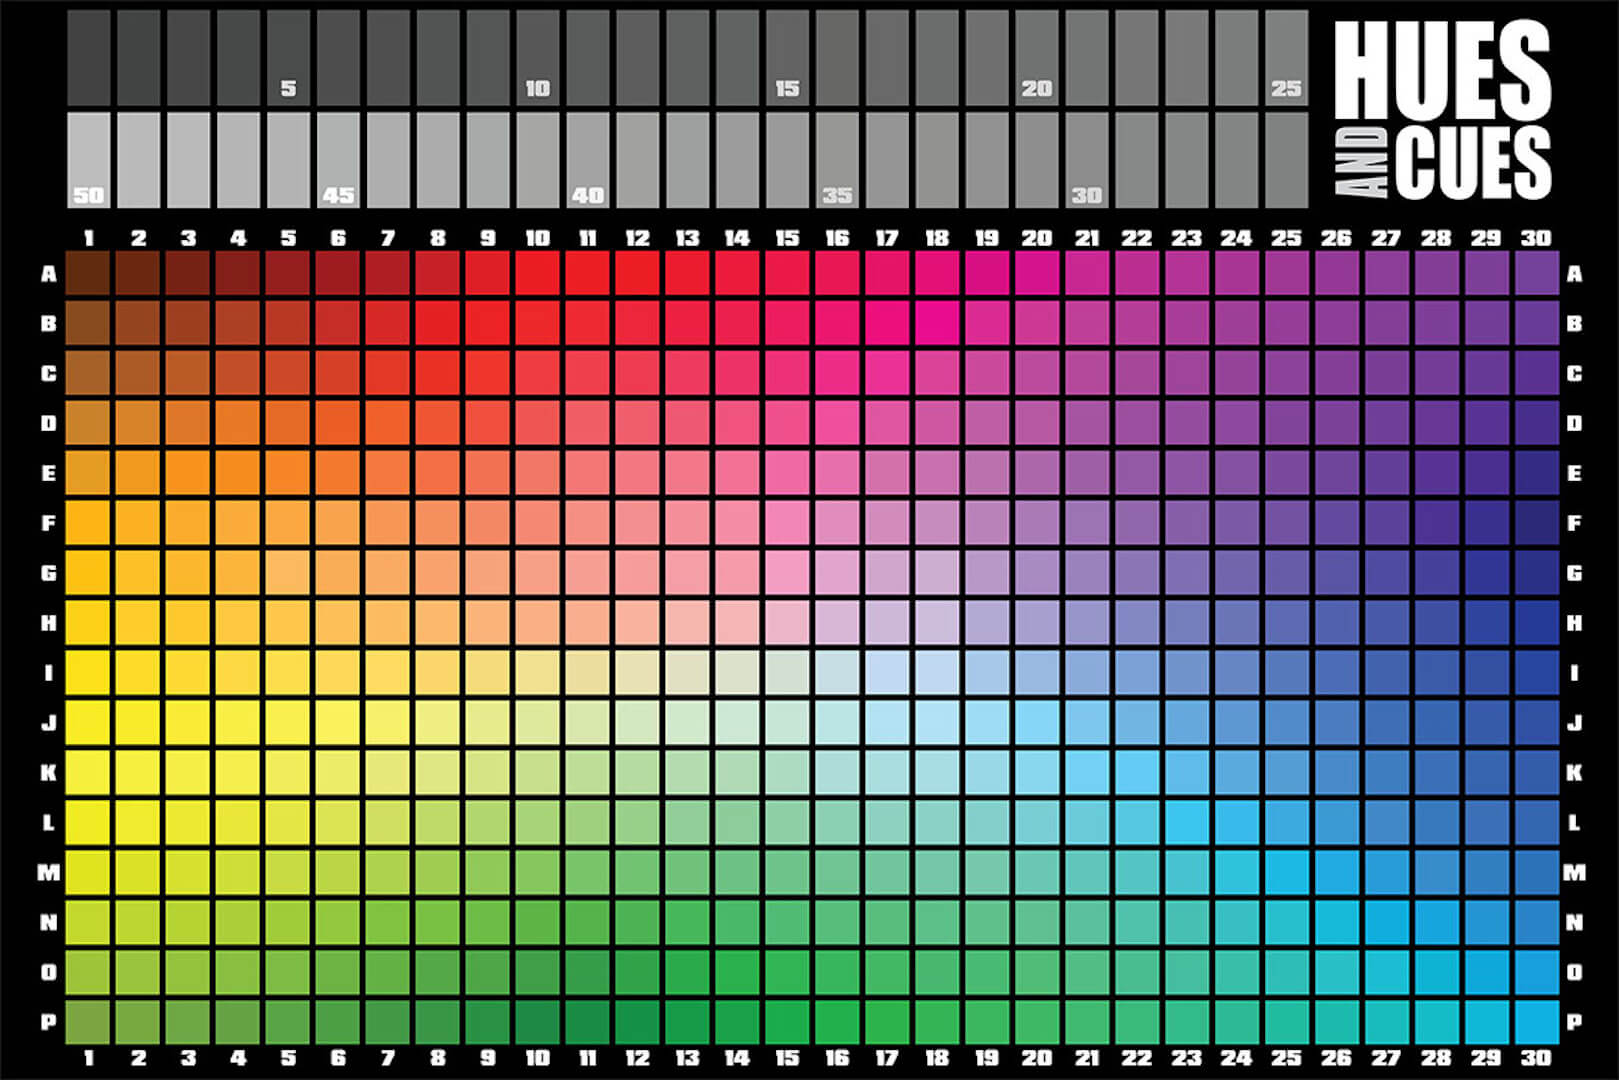 The Full Hues and Cues Board